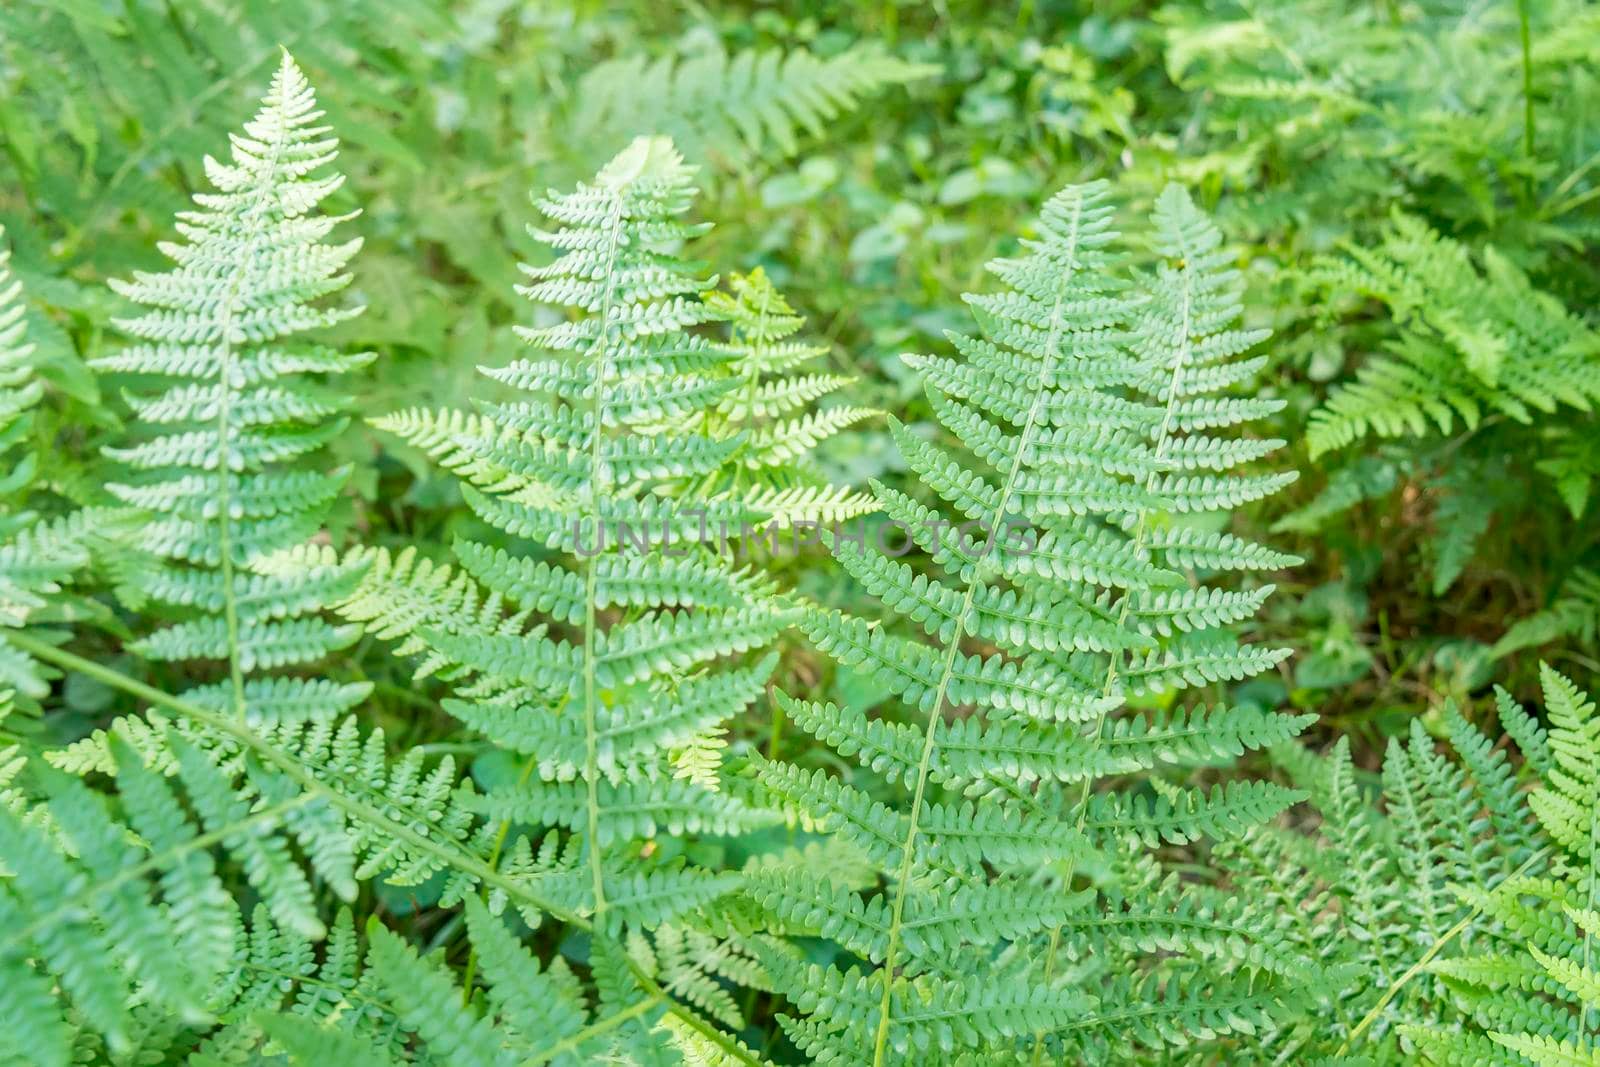 Fern detail in the shaded forest by max8xam